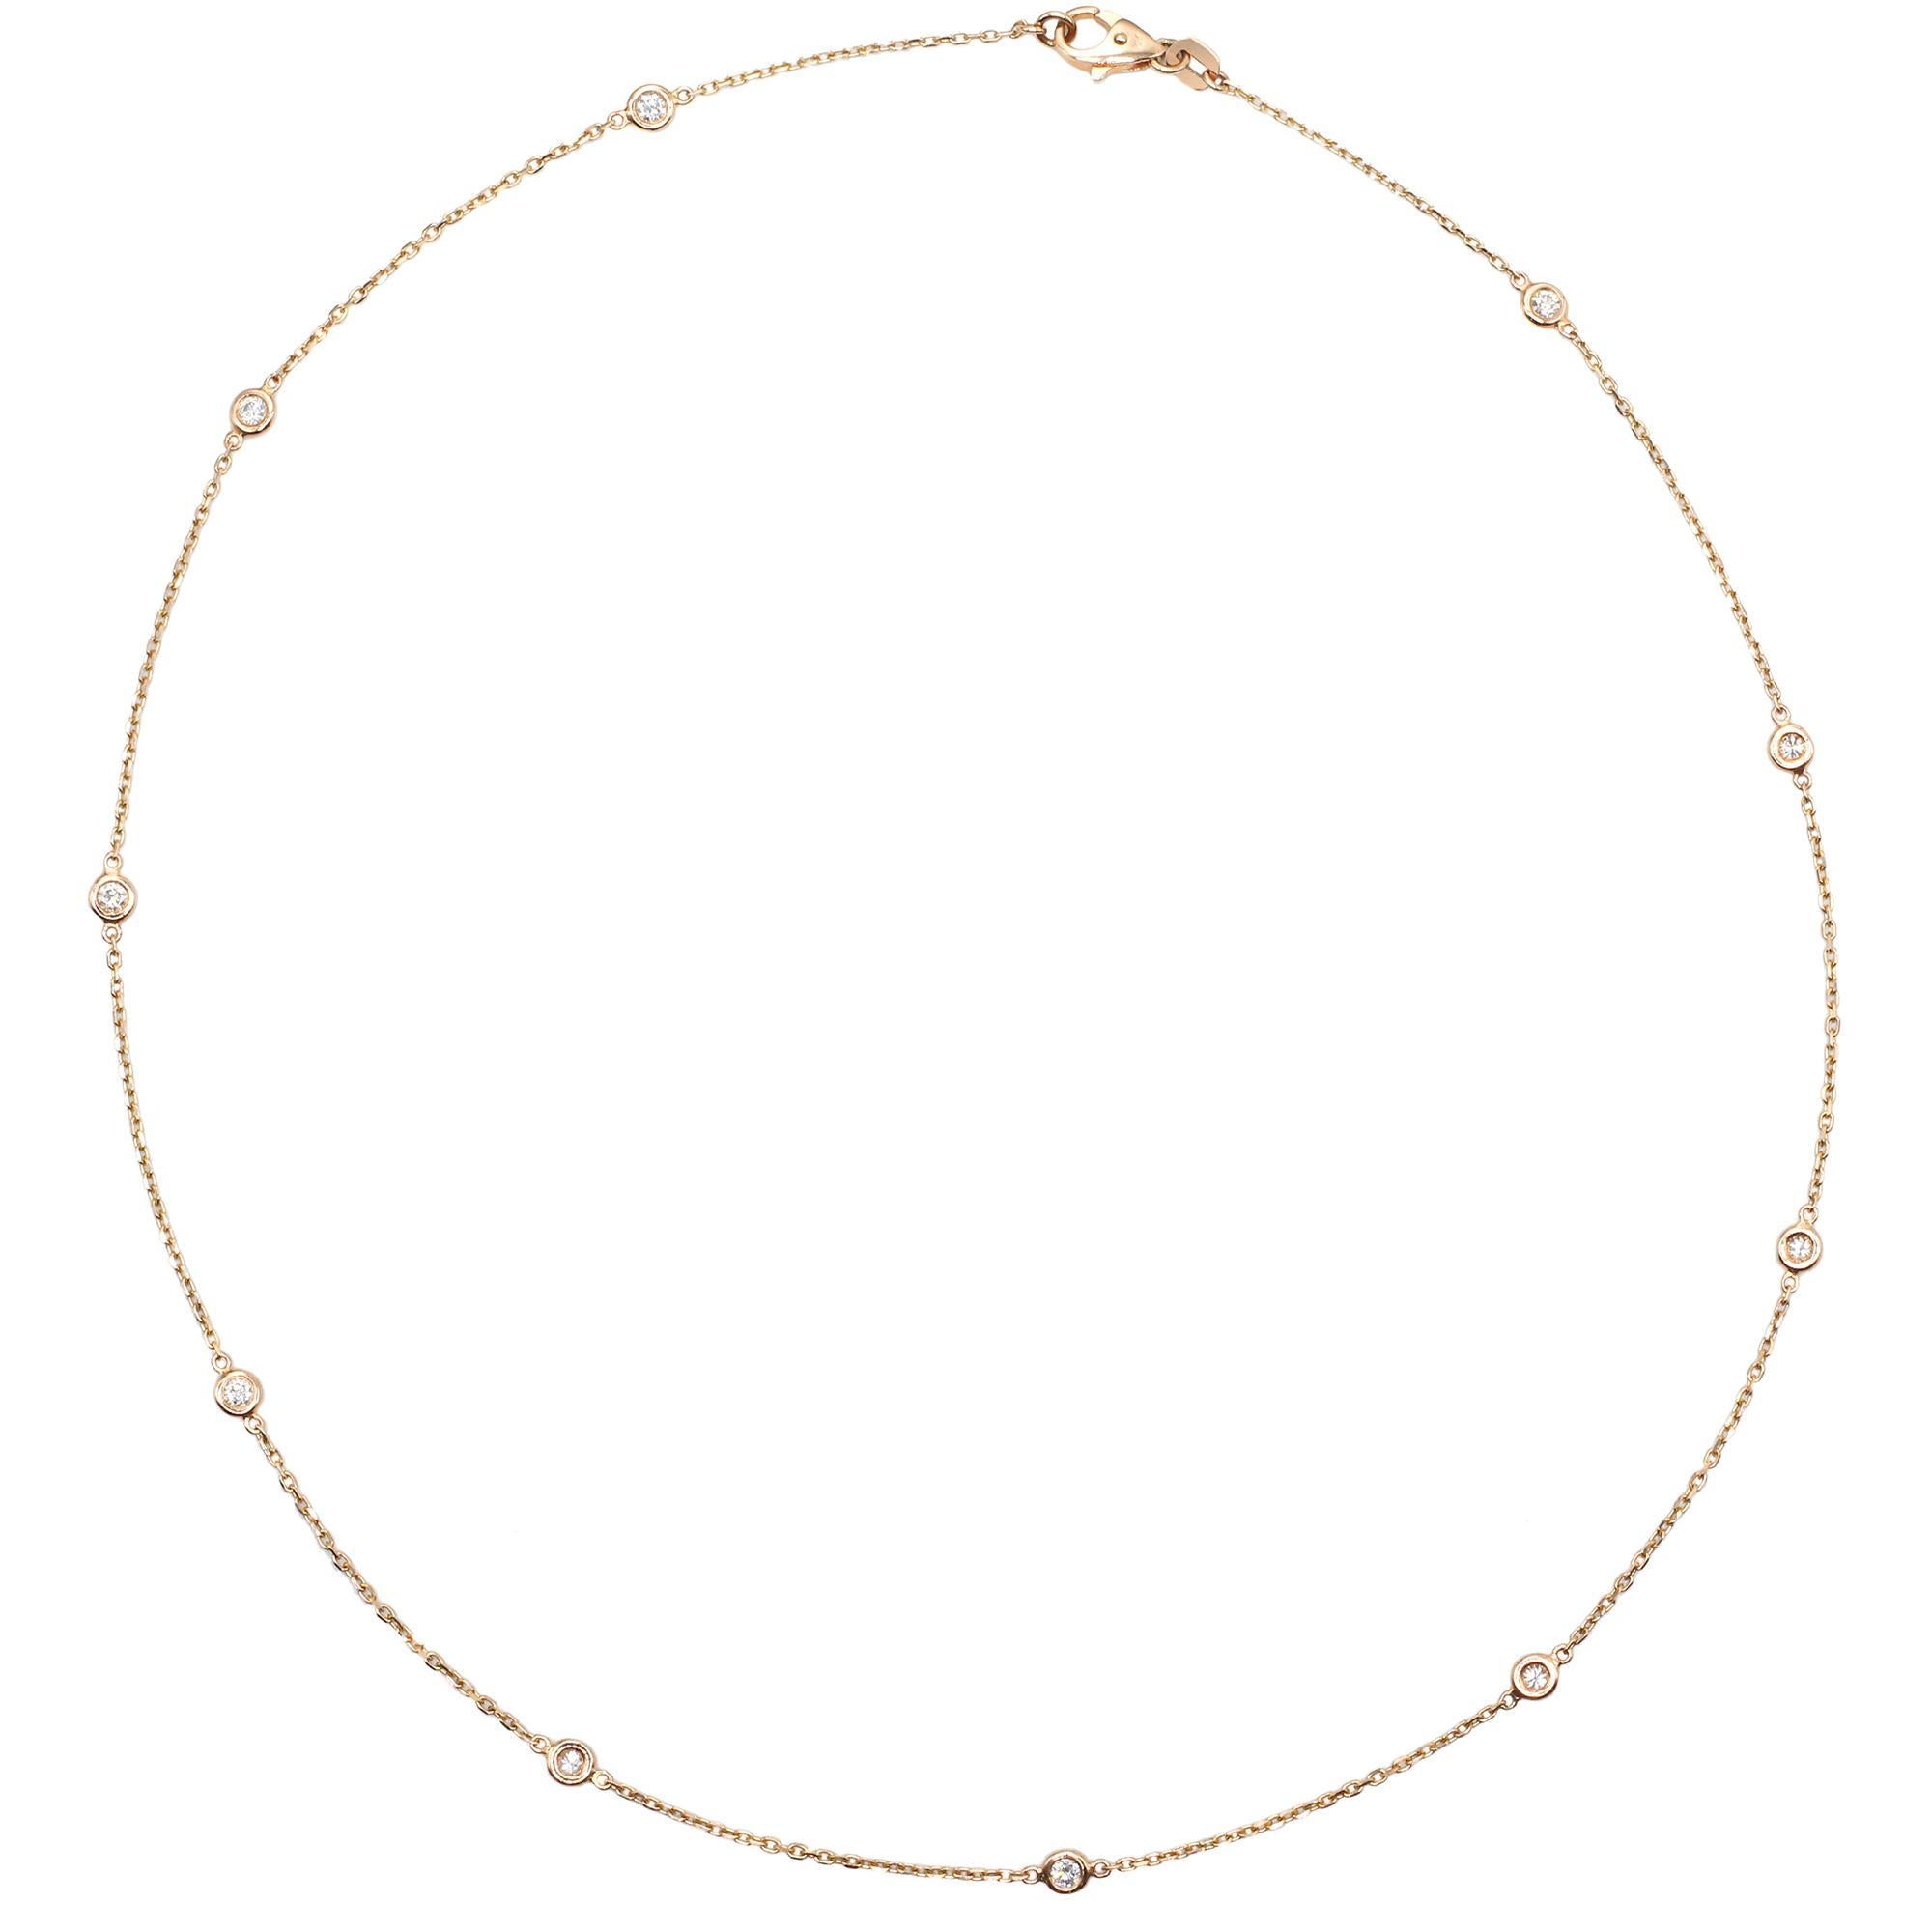 Rachel Koen Natural Diamond by the Yard Necklace 14K Rose Gold 0.61cttw For Sale